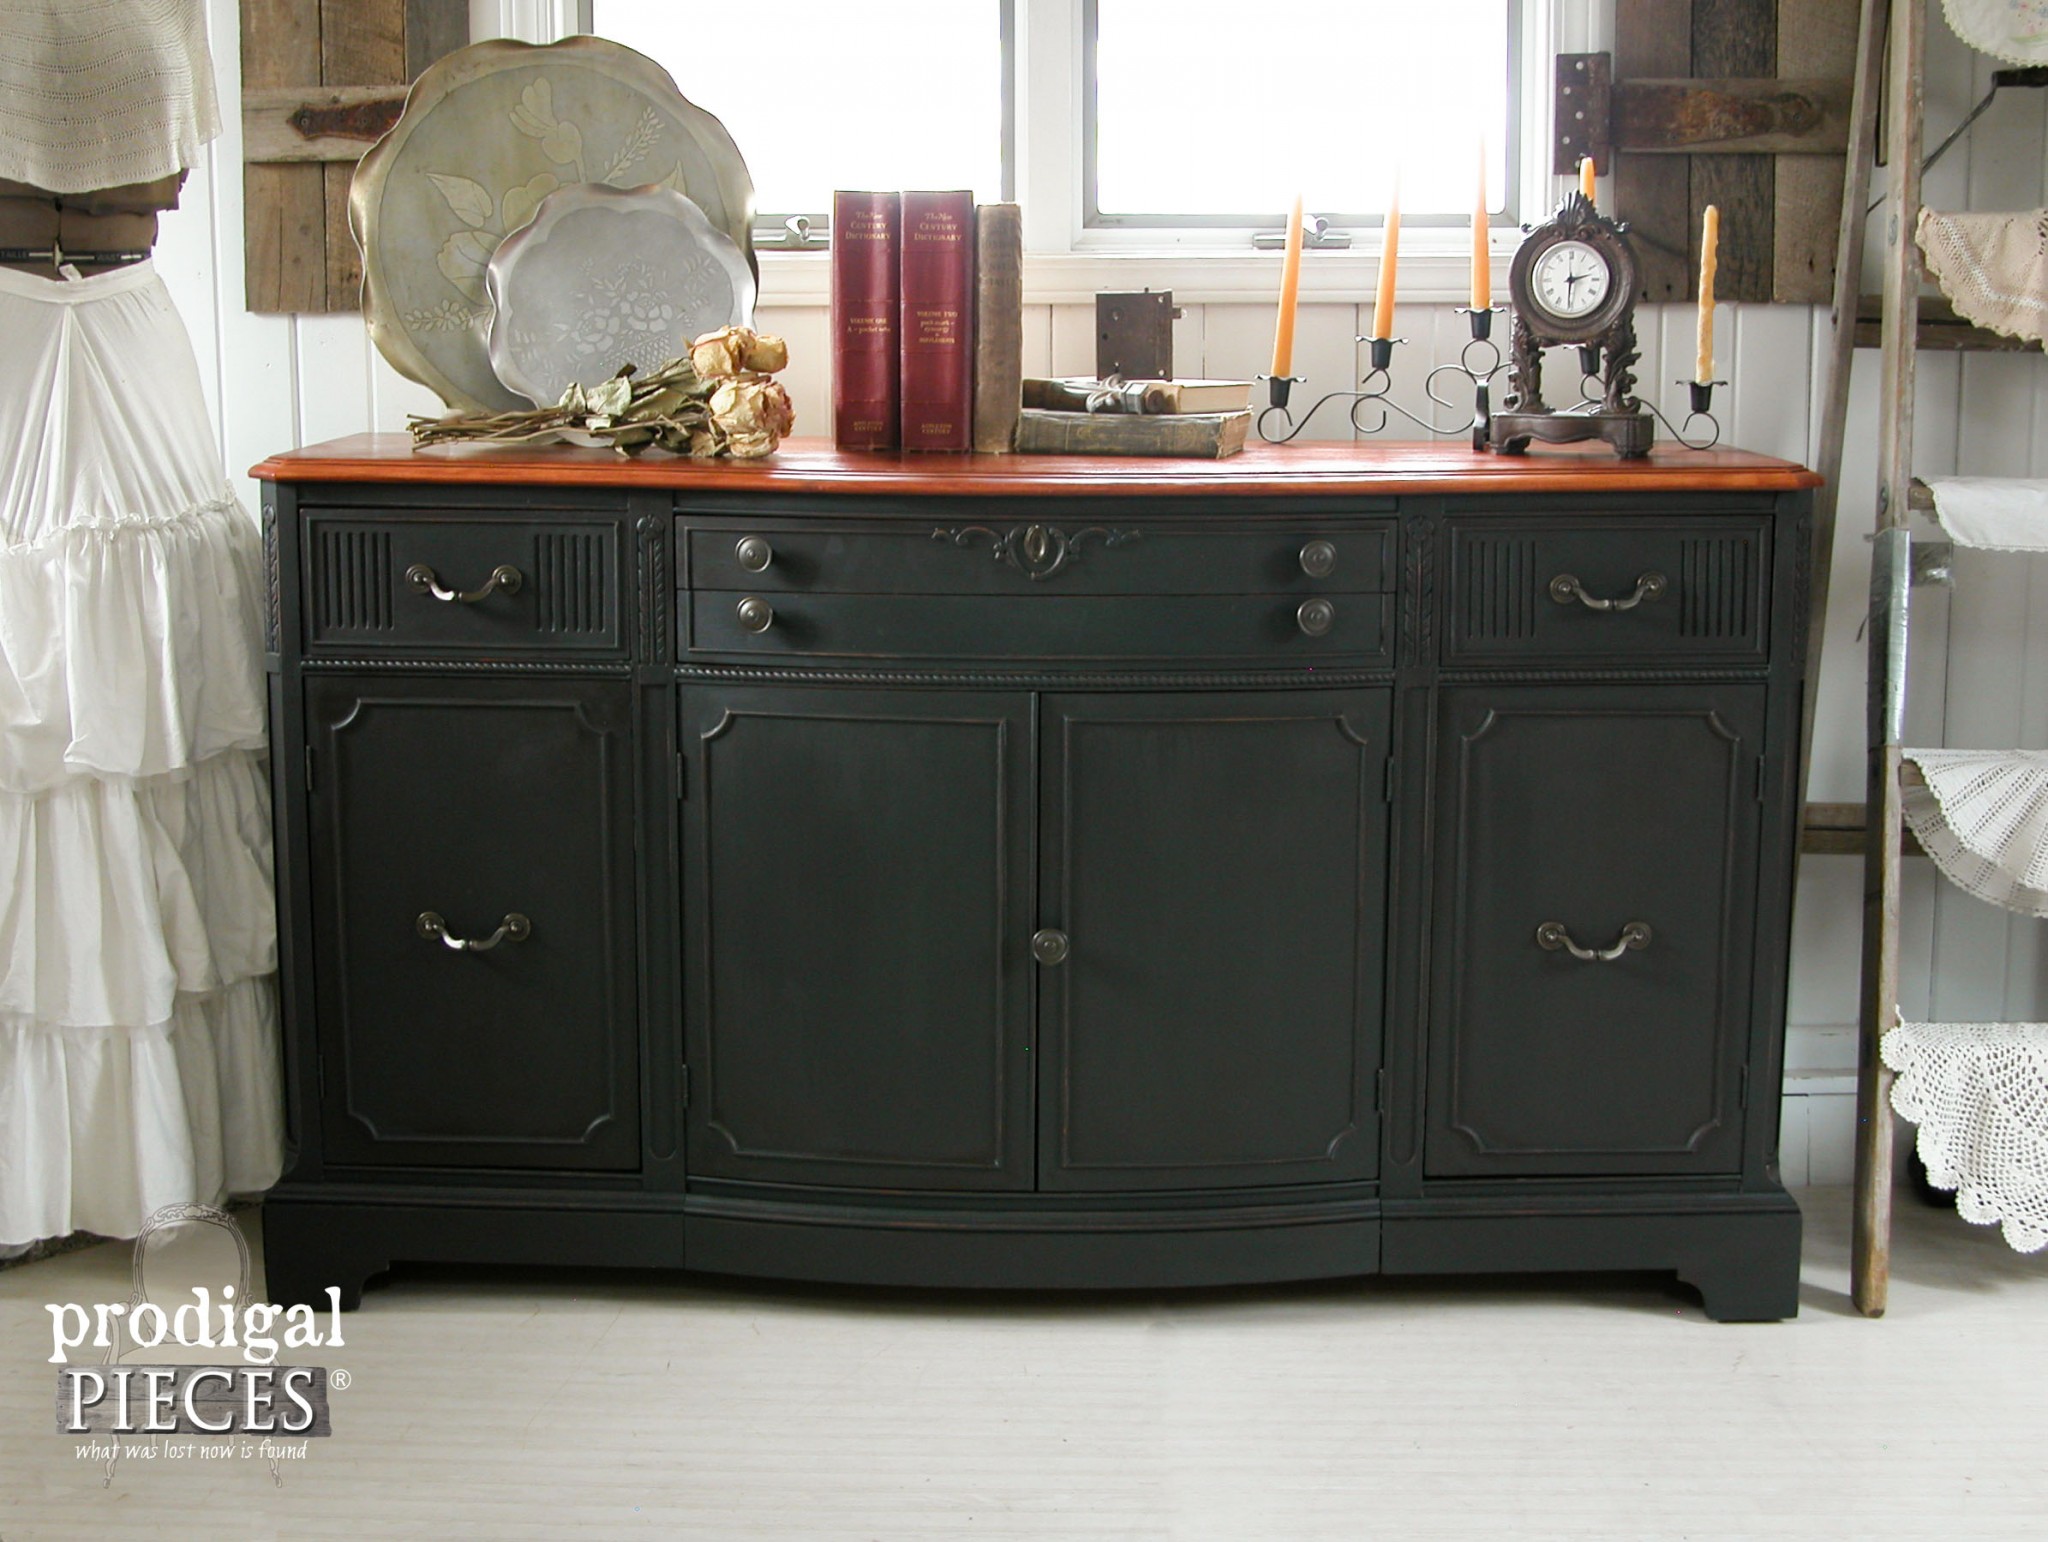 Vintage Buffet Gets Black Paint and Cherry Stain Makeover by Prodigal Pieces | www.prodigalpieces.com